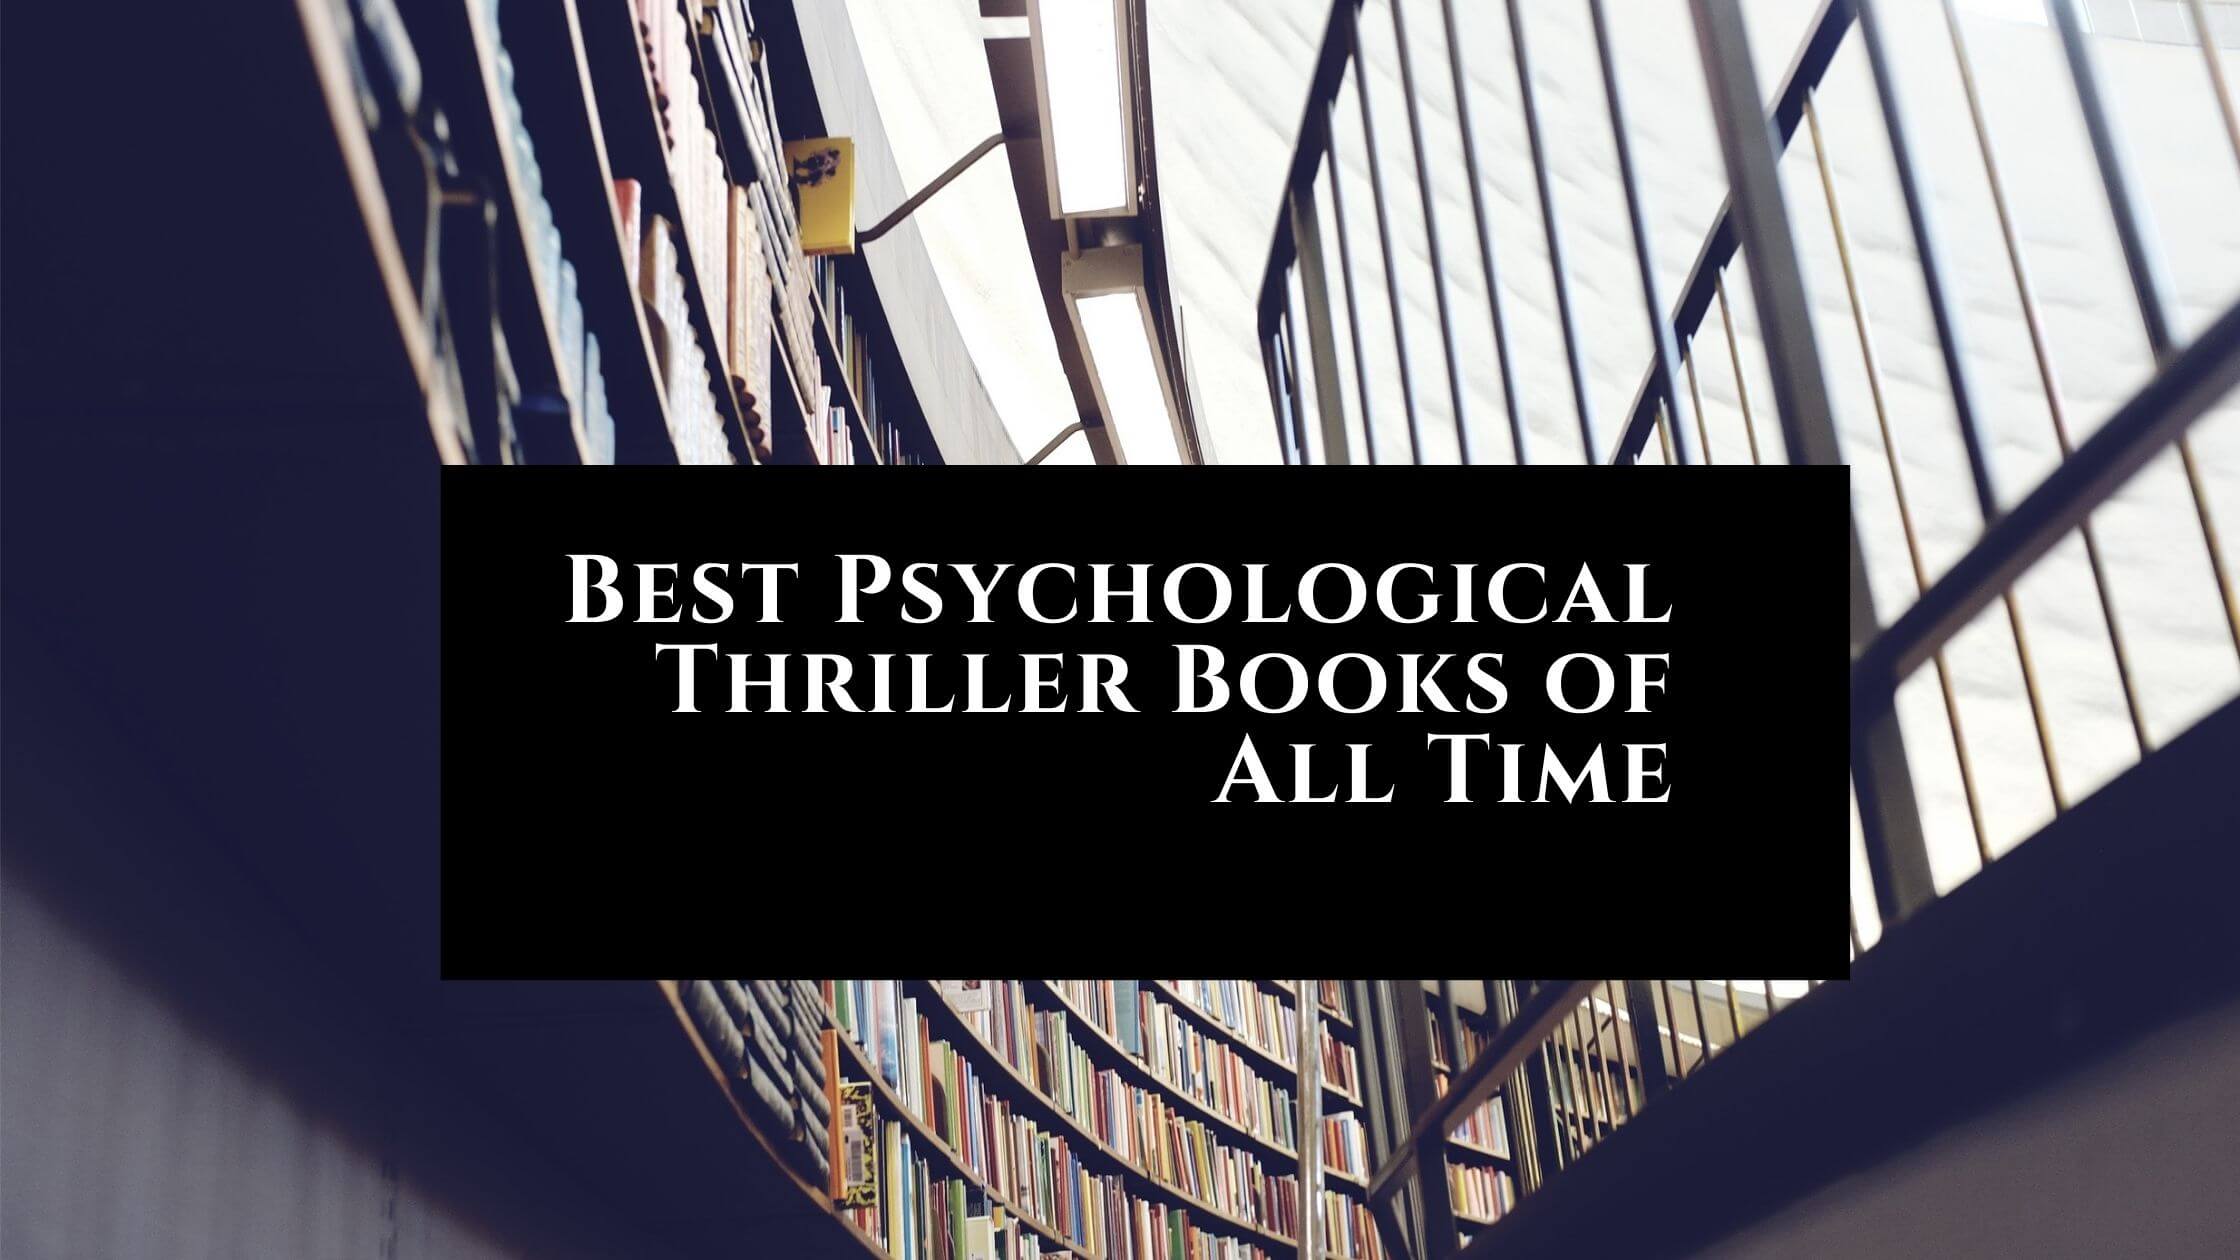 Why We Always Fall for Best Psychological Thriller Books of All Time?